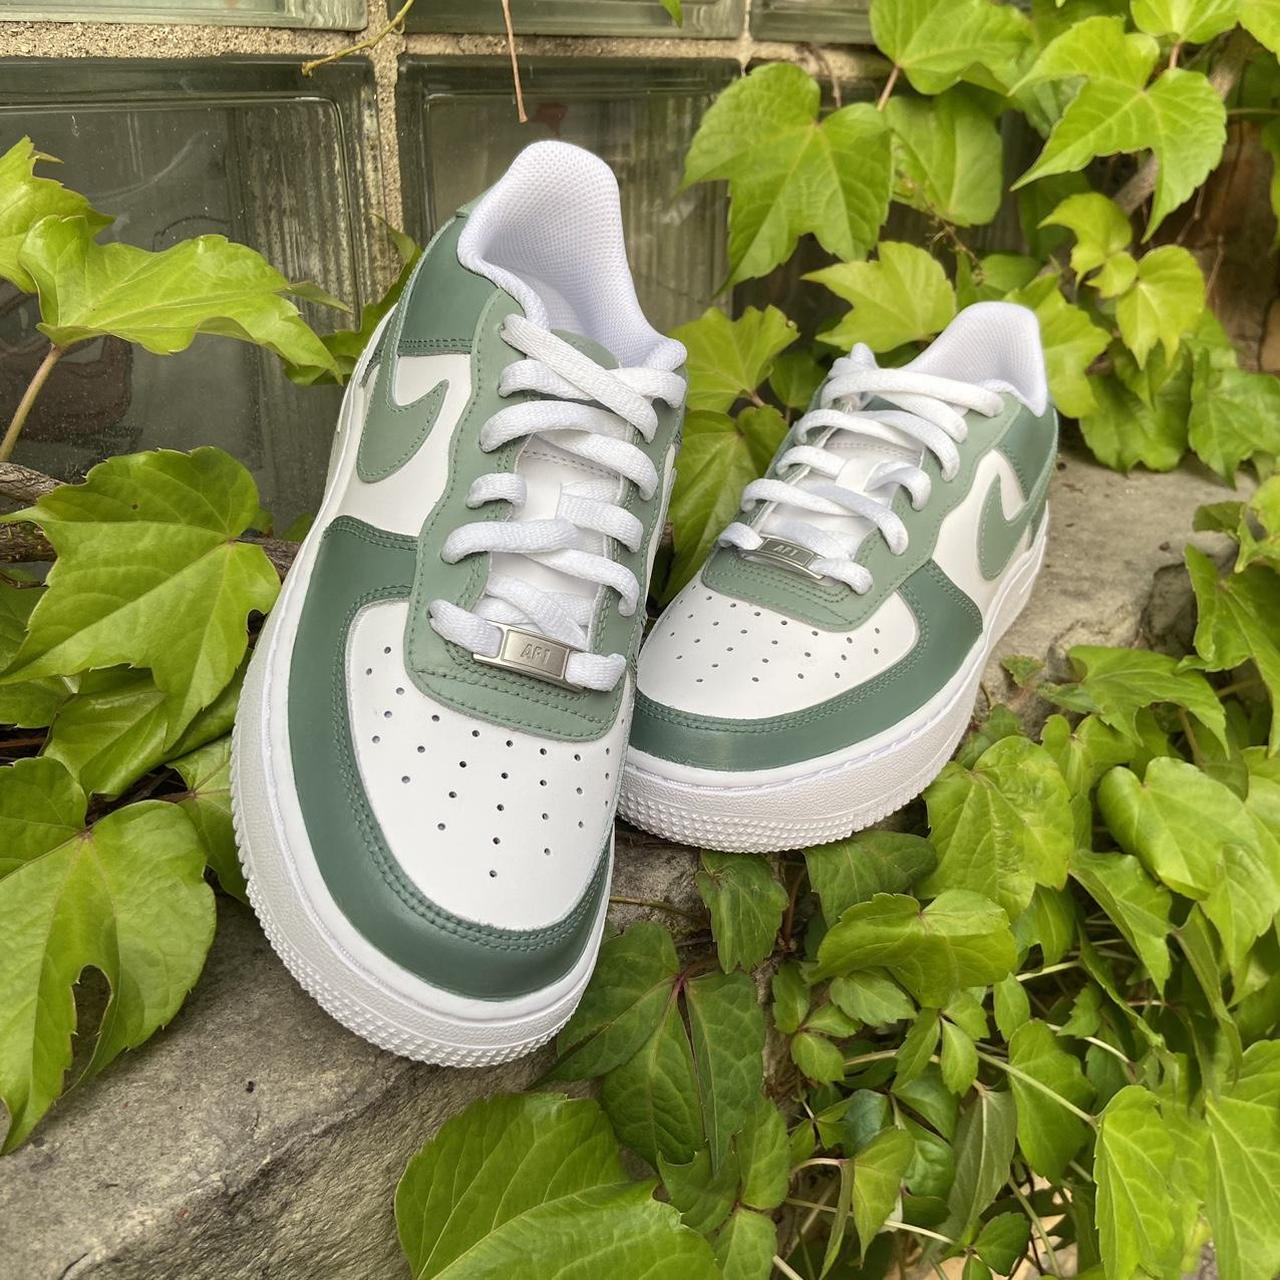 Air Force 1 Custom Low Two Tone Army Green White Shoes Men Women